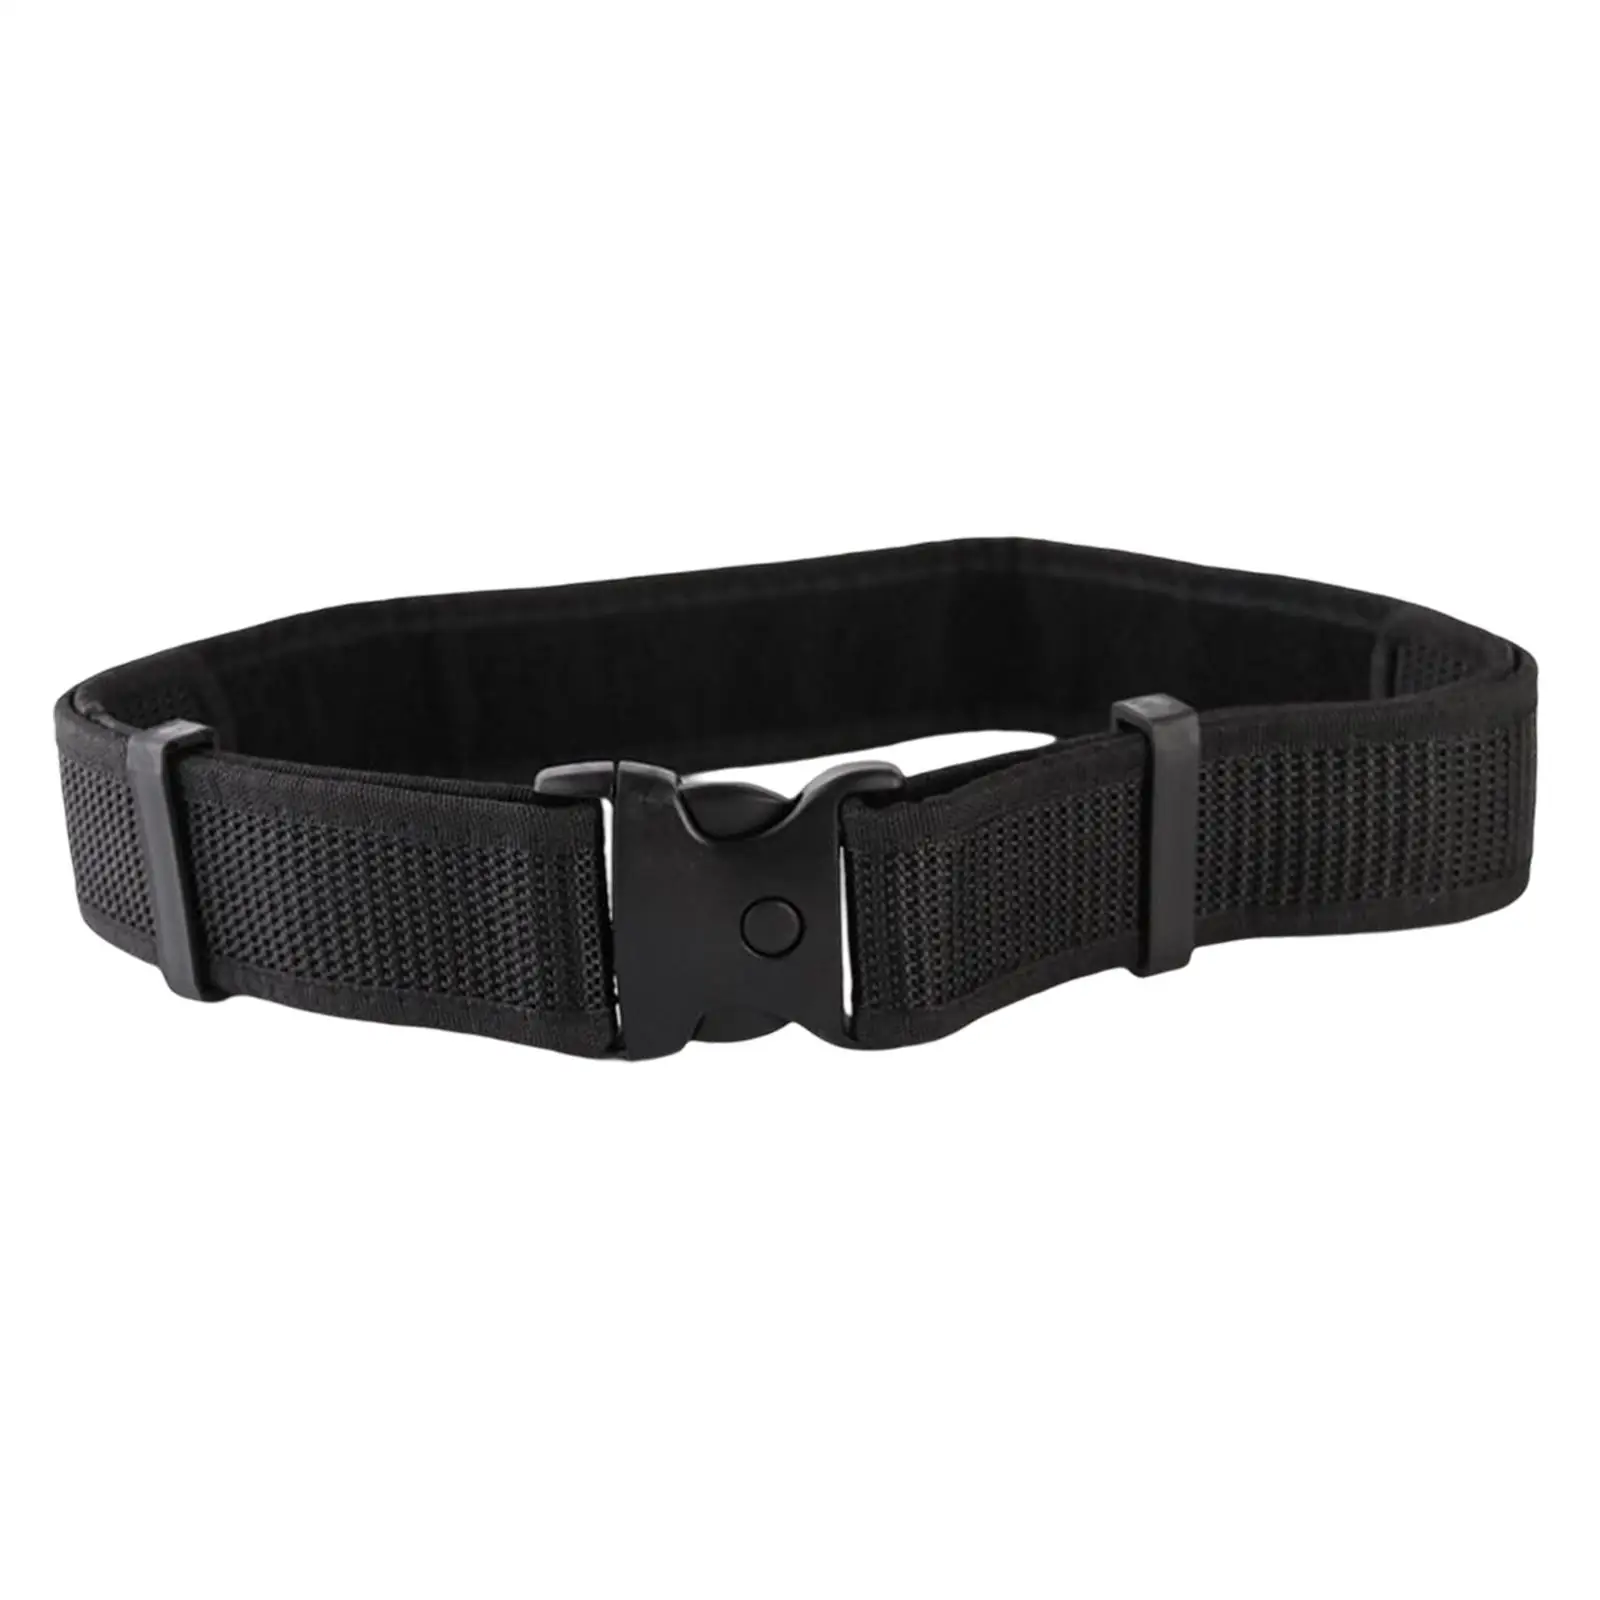 

Fashion Men Belt Heavy Duty Webbing Braided Quick Buckle Adjustable PP Waistband for Hiking Outdoor Hunting Training